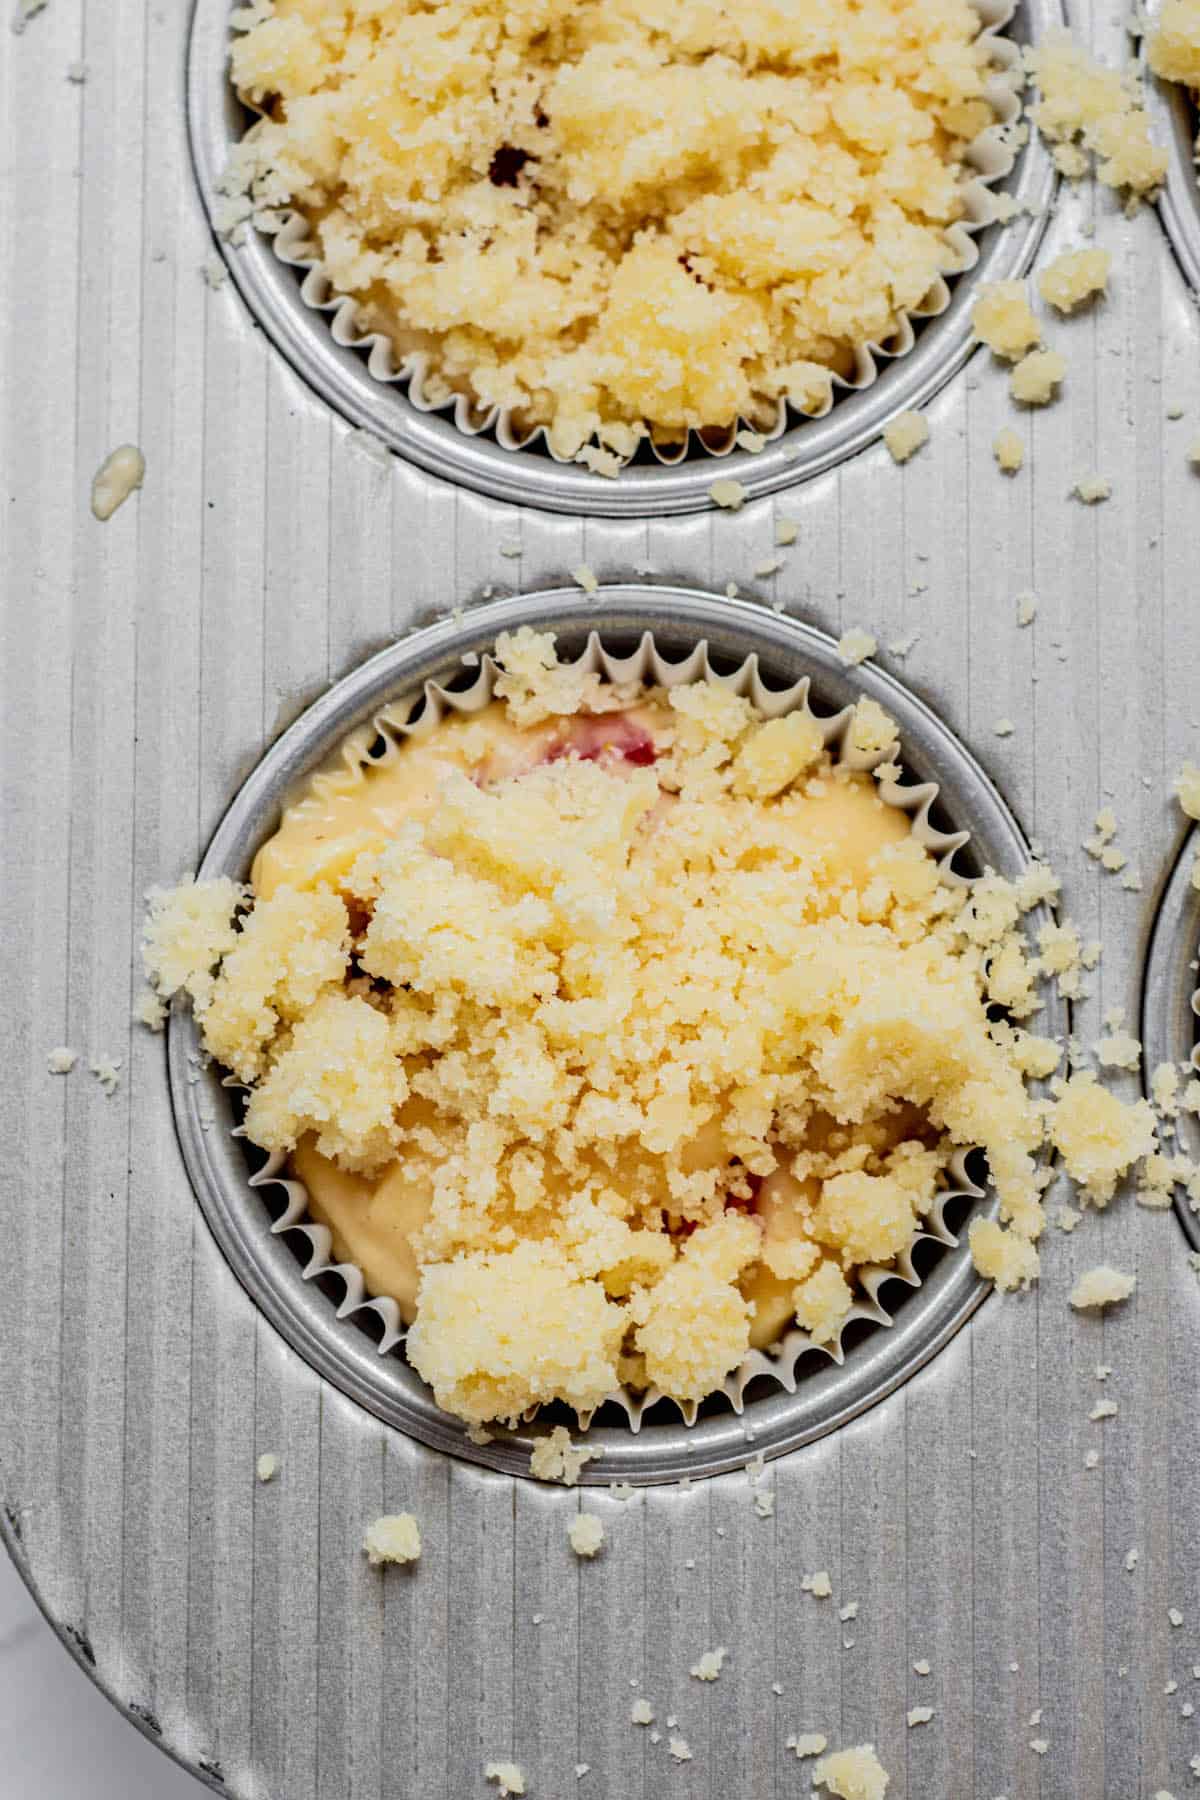 streusel topped muffin batter.